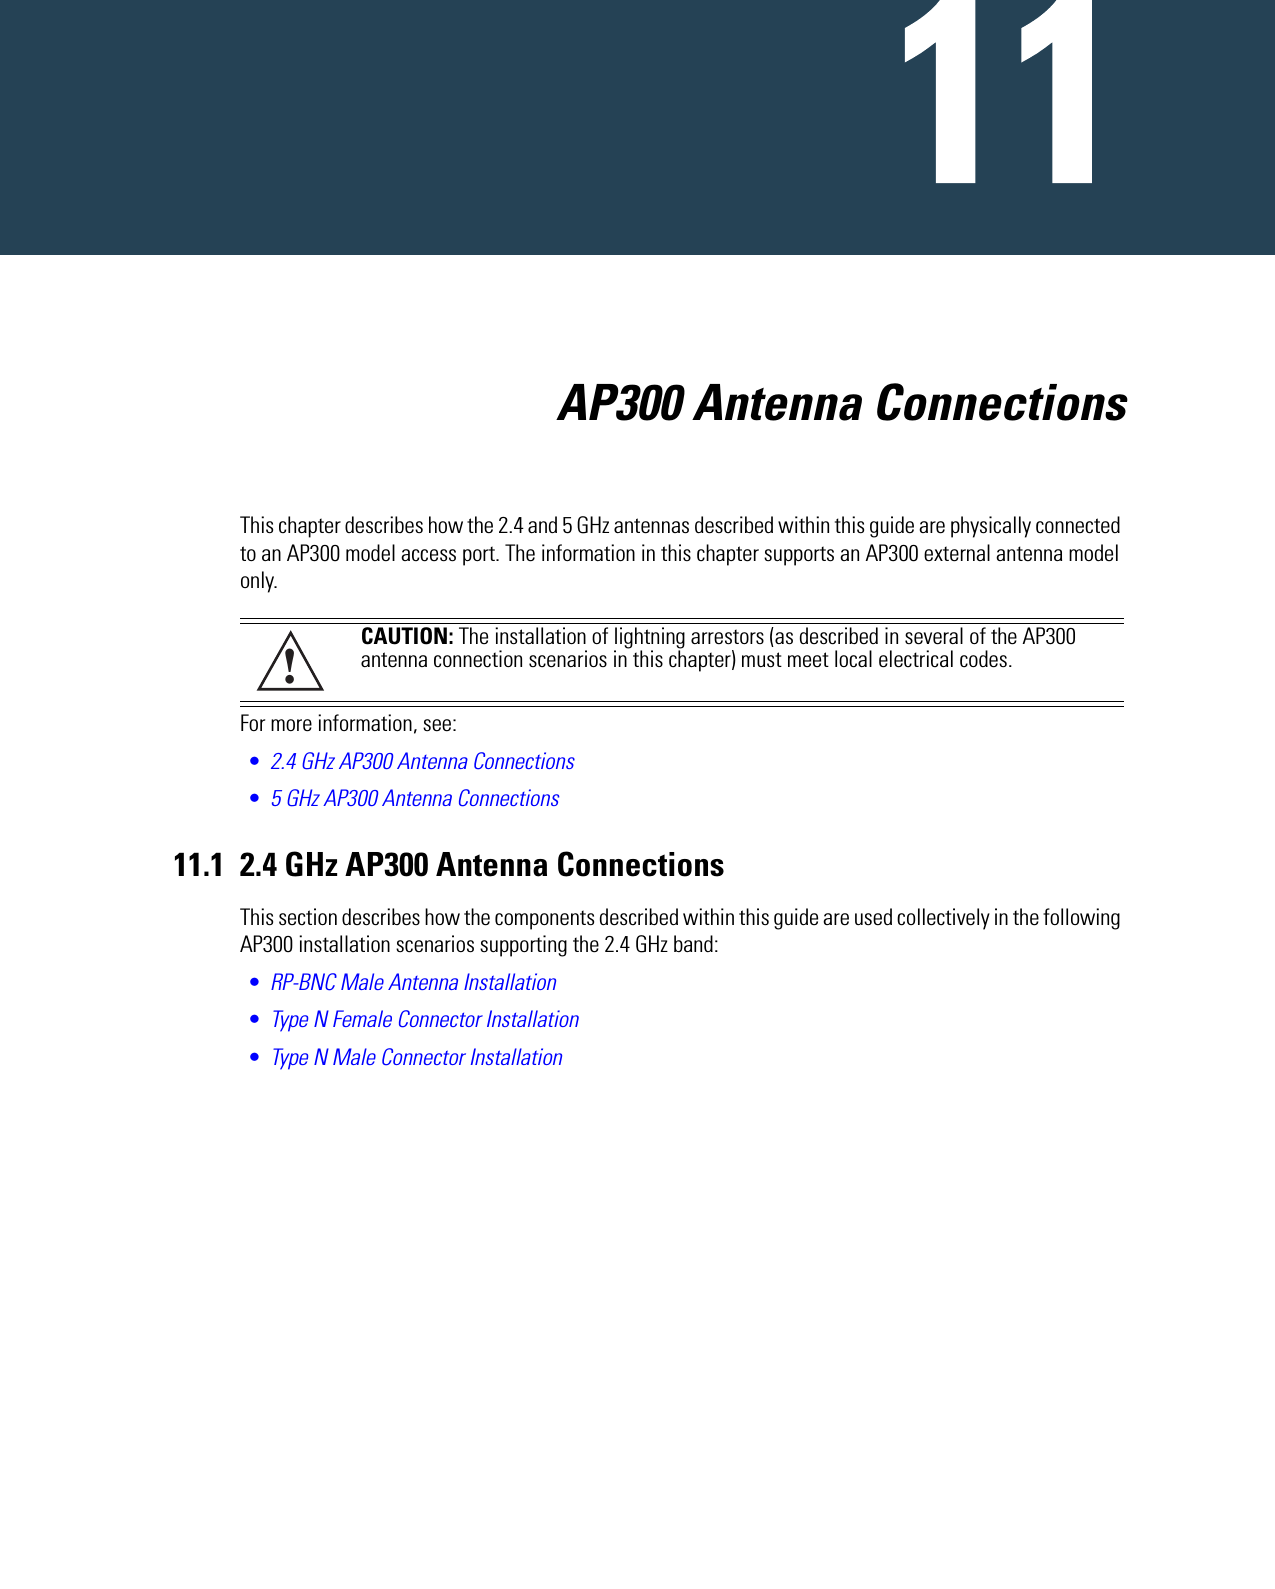                               AP300 Antenna ConnectionsThis chapter describes how the 2.4 and 5 GHz antennas described within this guide are physically connected to an AP300 model access port. The information in this chapter supports an AP300 external antenna model only.For more information, see:•2.4 GHz AP300 Antenna Connections•5 GHz AP300 Antenna Connections11.1 2.4 GHz AP300 Antenna ConnectionsThis section describes how the components described within this guide are used collectively in the following AP300 installation scenarios supporting the 2.4 GHz band:•RP-BNC Male Antenna Installation•Type N Female Connector Installation•Type N Male Connector InstallationCAUTION: The installation of lightning arrestors (as described in several of the AP300 antenna connection scenarios in this chapter) must meet local electrical codes. !